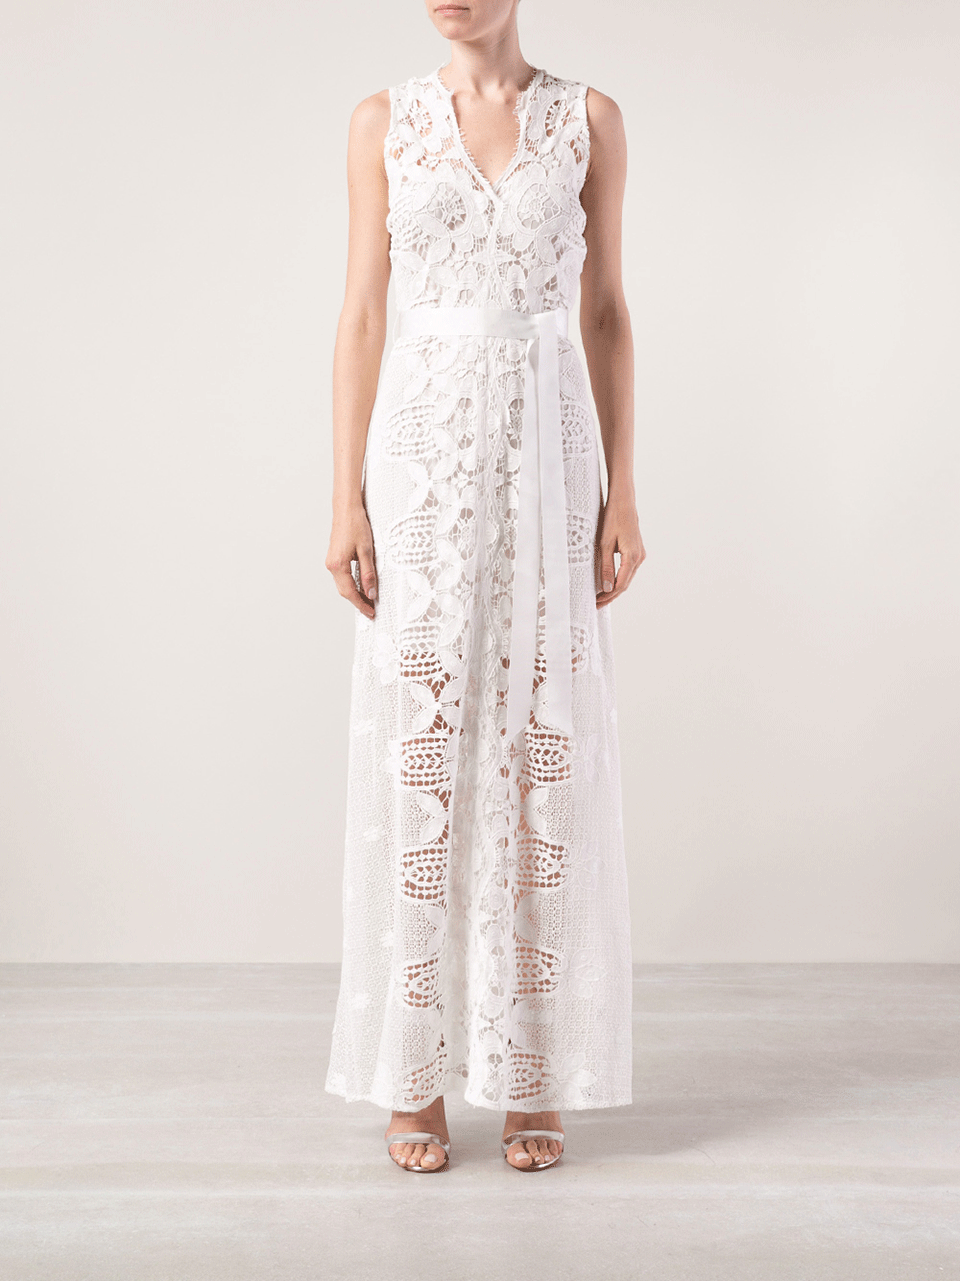 MIGUELINA-Eve Belted Long Lace Dress-